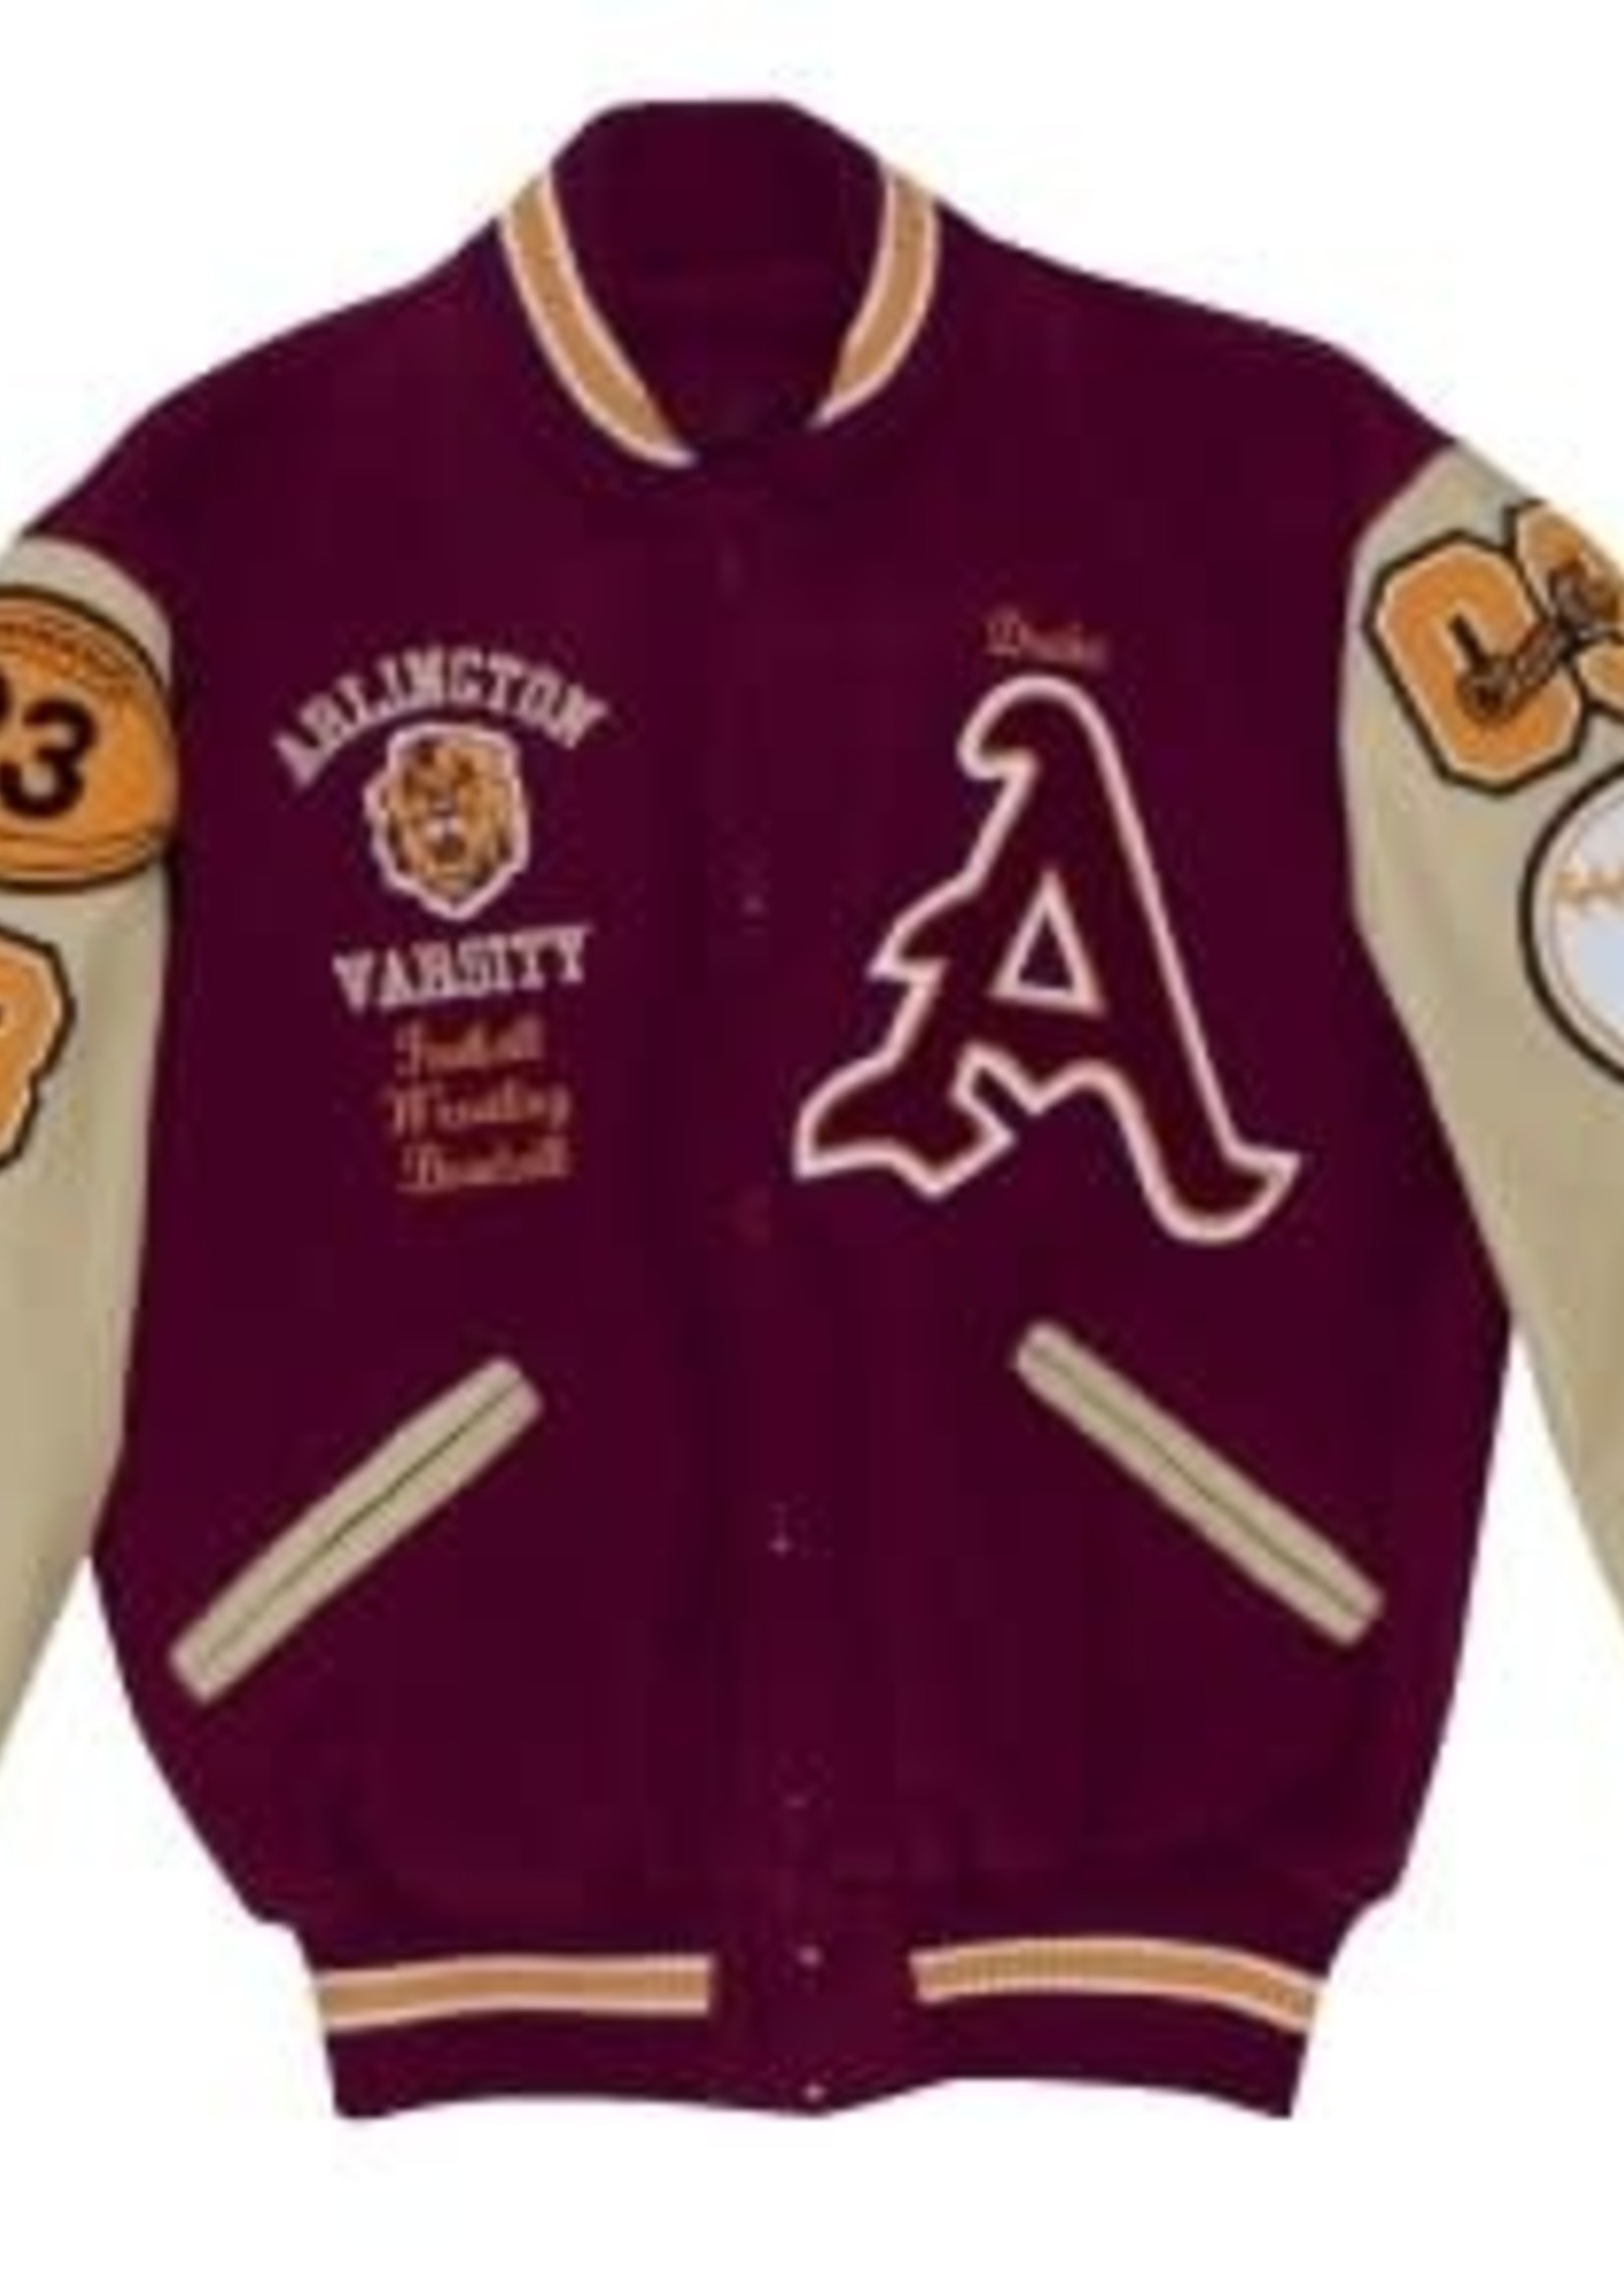 Letter Jacket Patch Placement Tranetbiologiaufrjbr